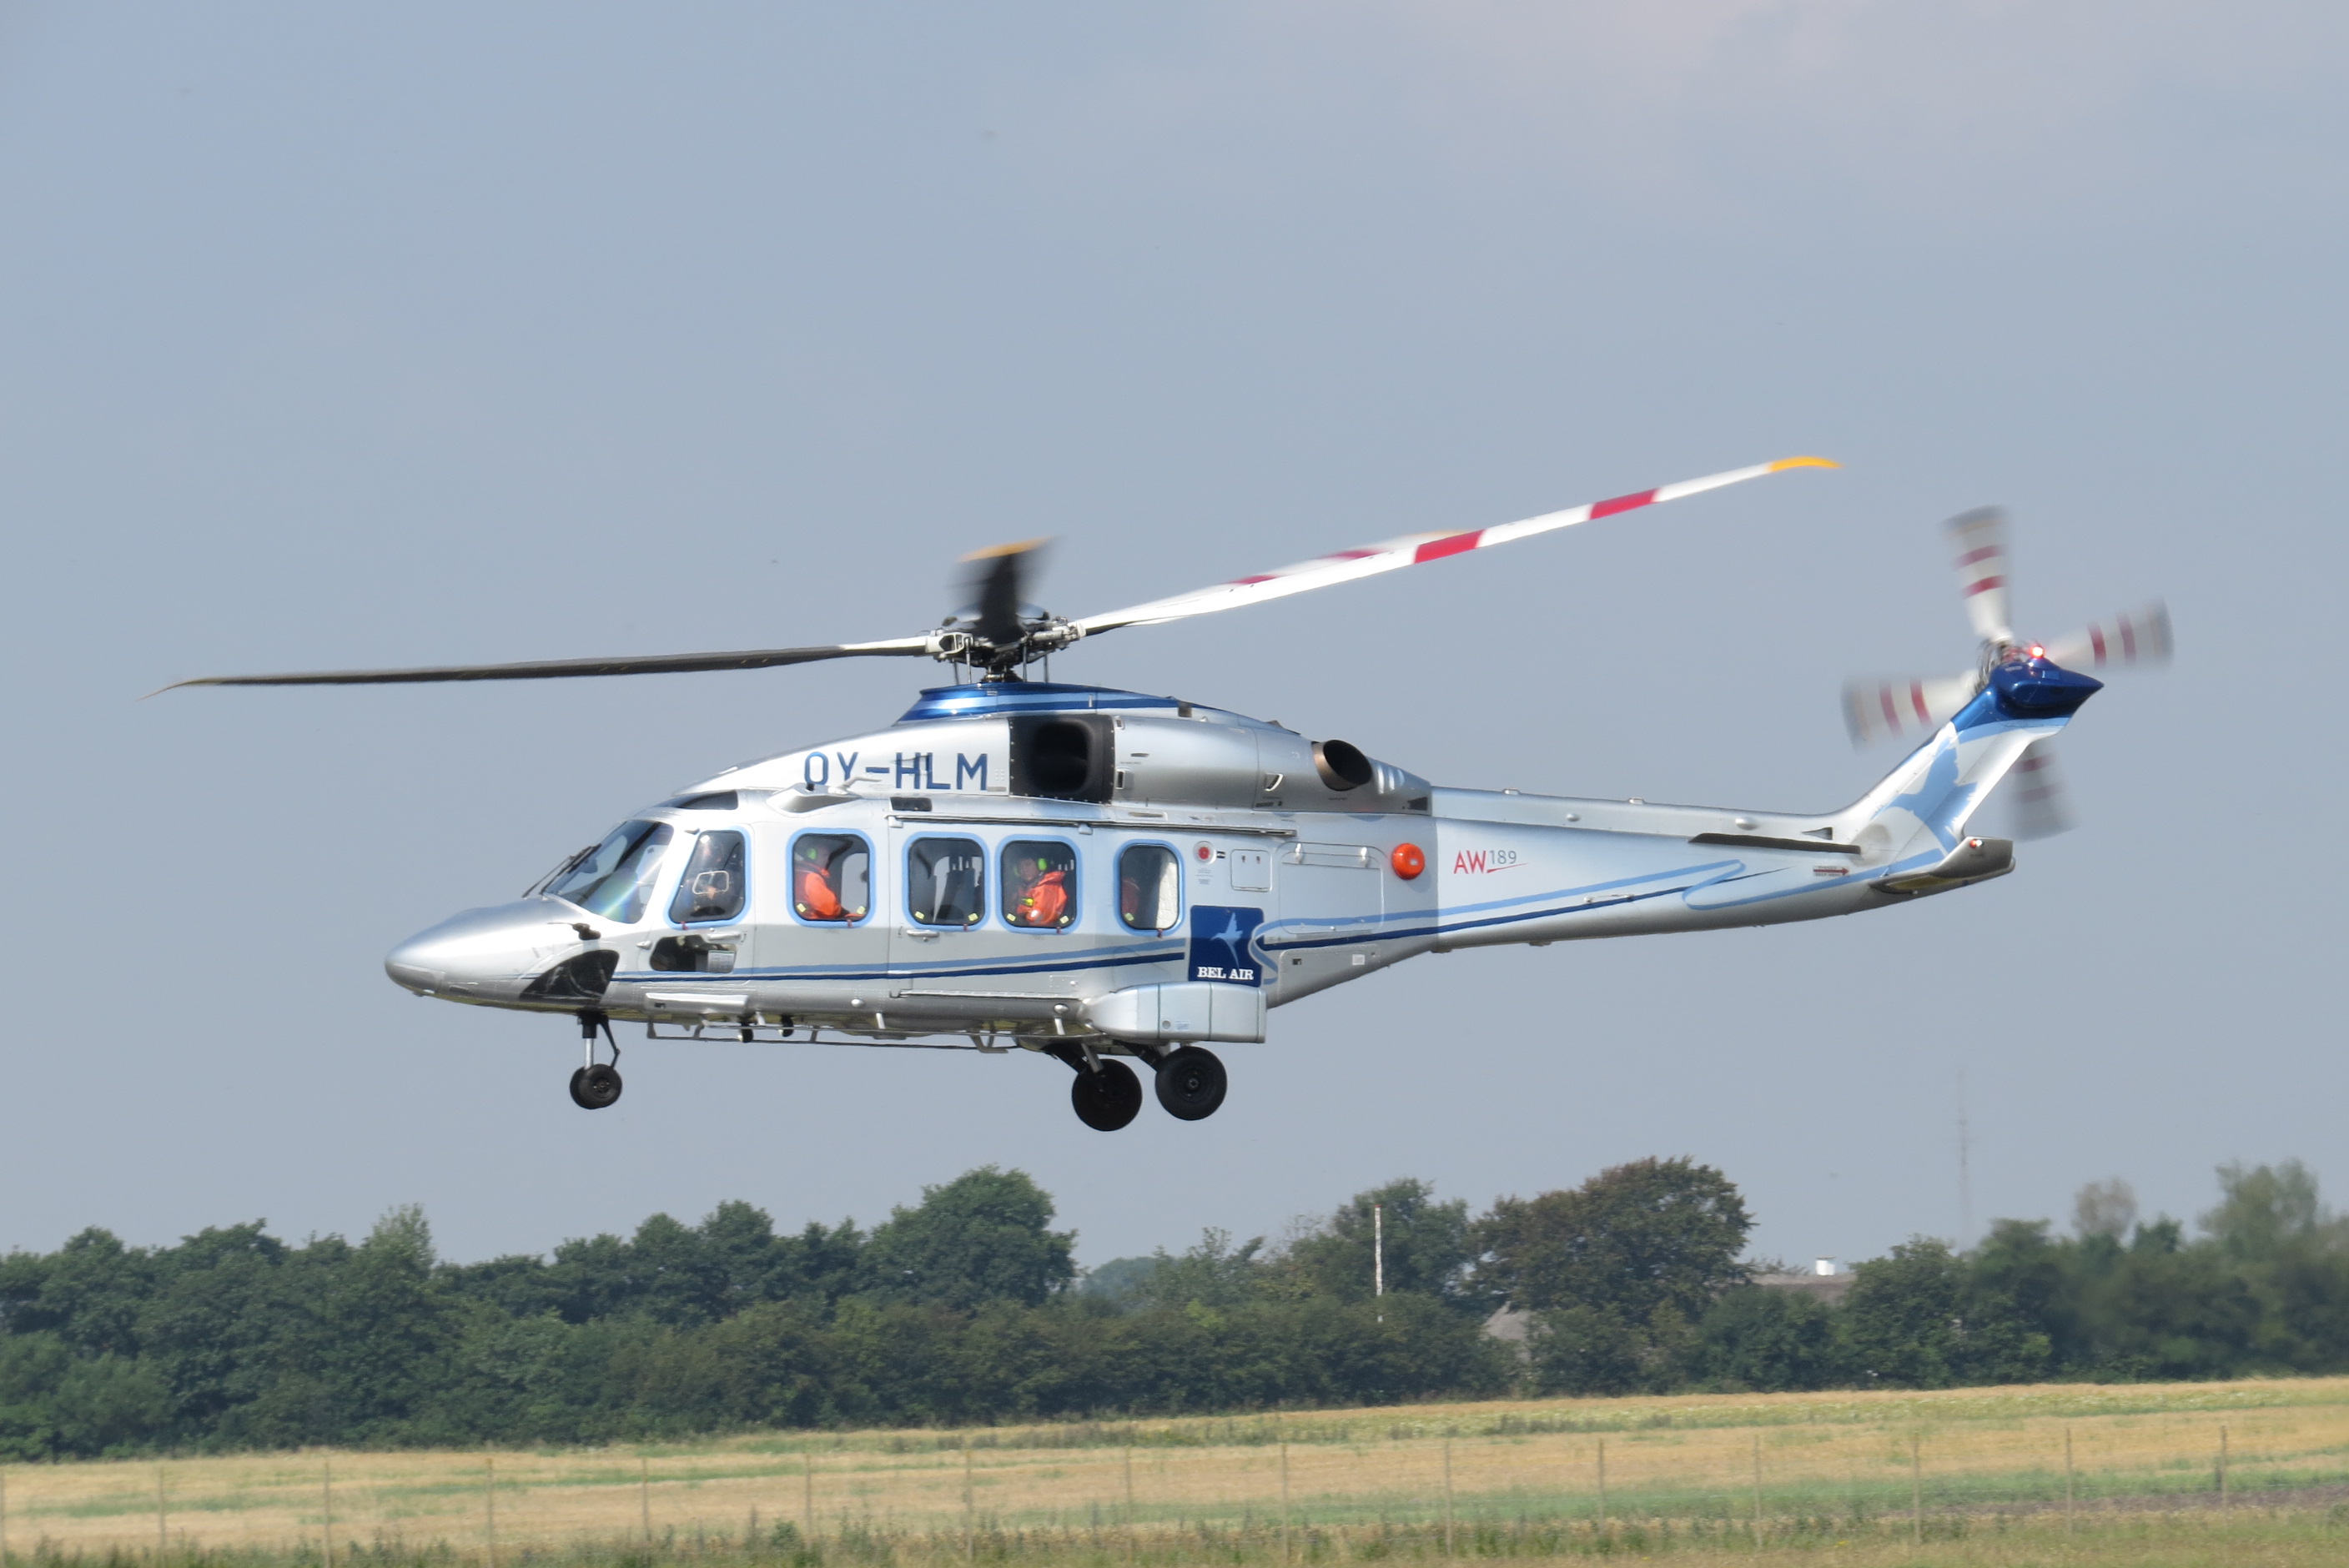 A Bel Air AW189 helicopter, powered by two GE CT7-2E1 engines.